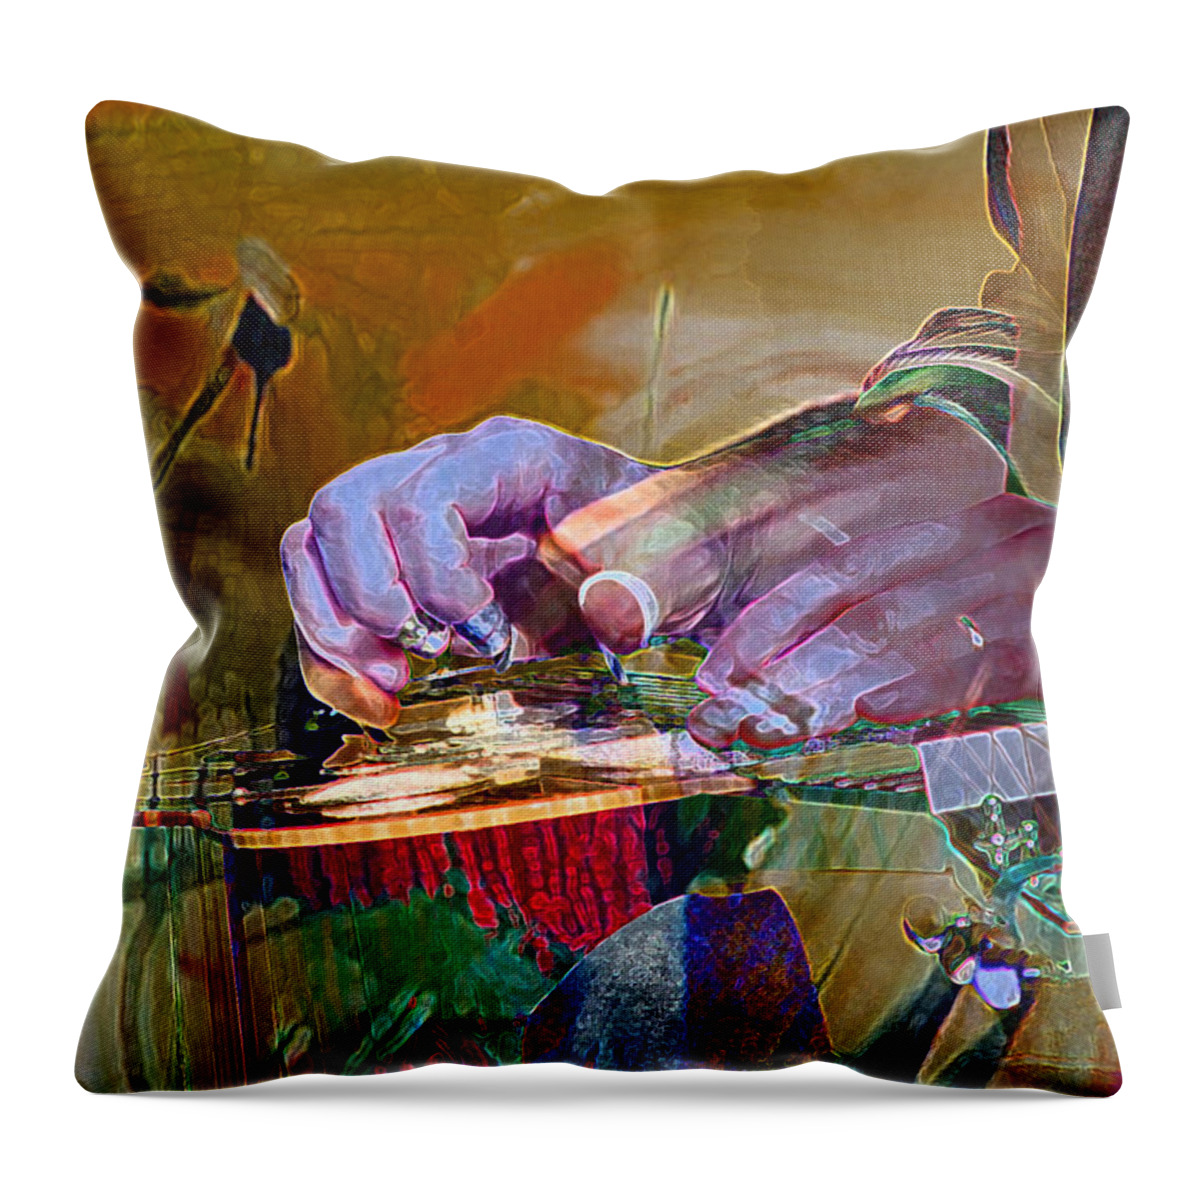 Music Throw Pillow featuring the digital art Flaming Hands in Motion by Julie Turner